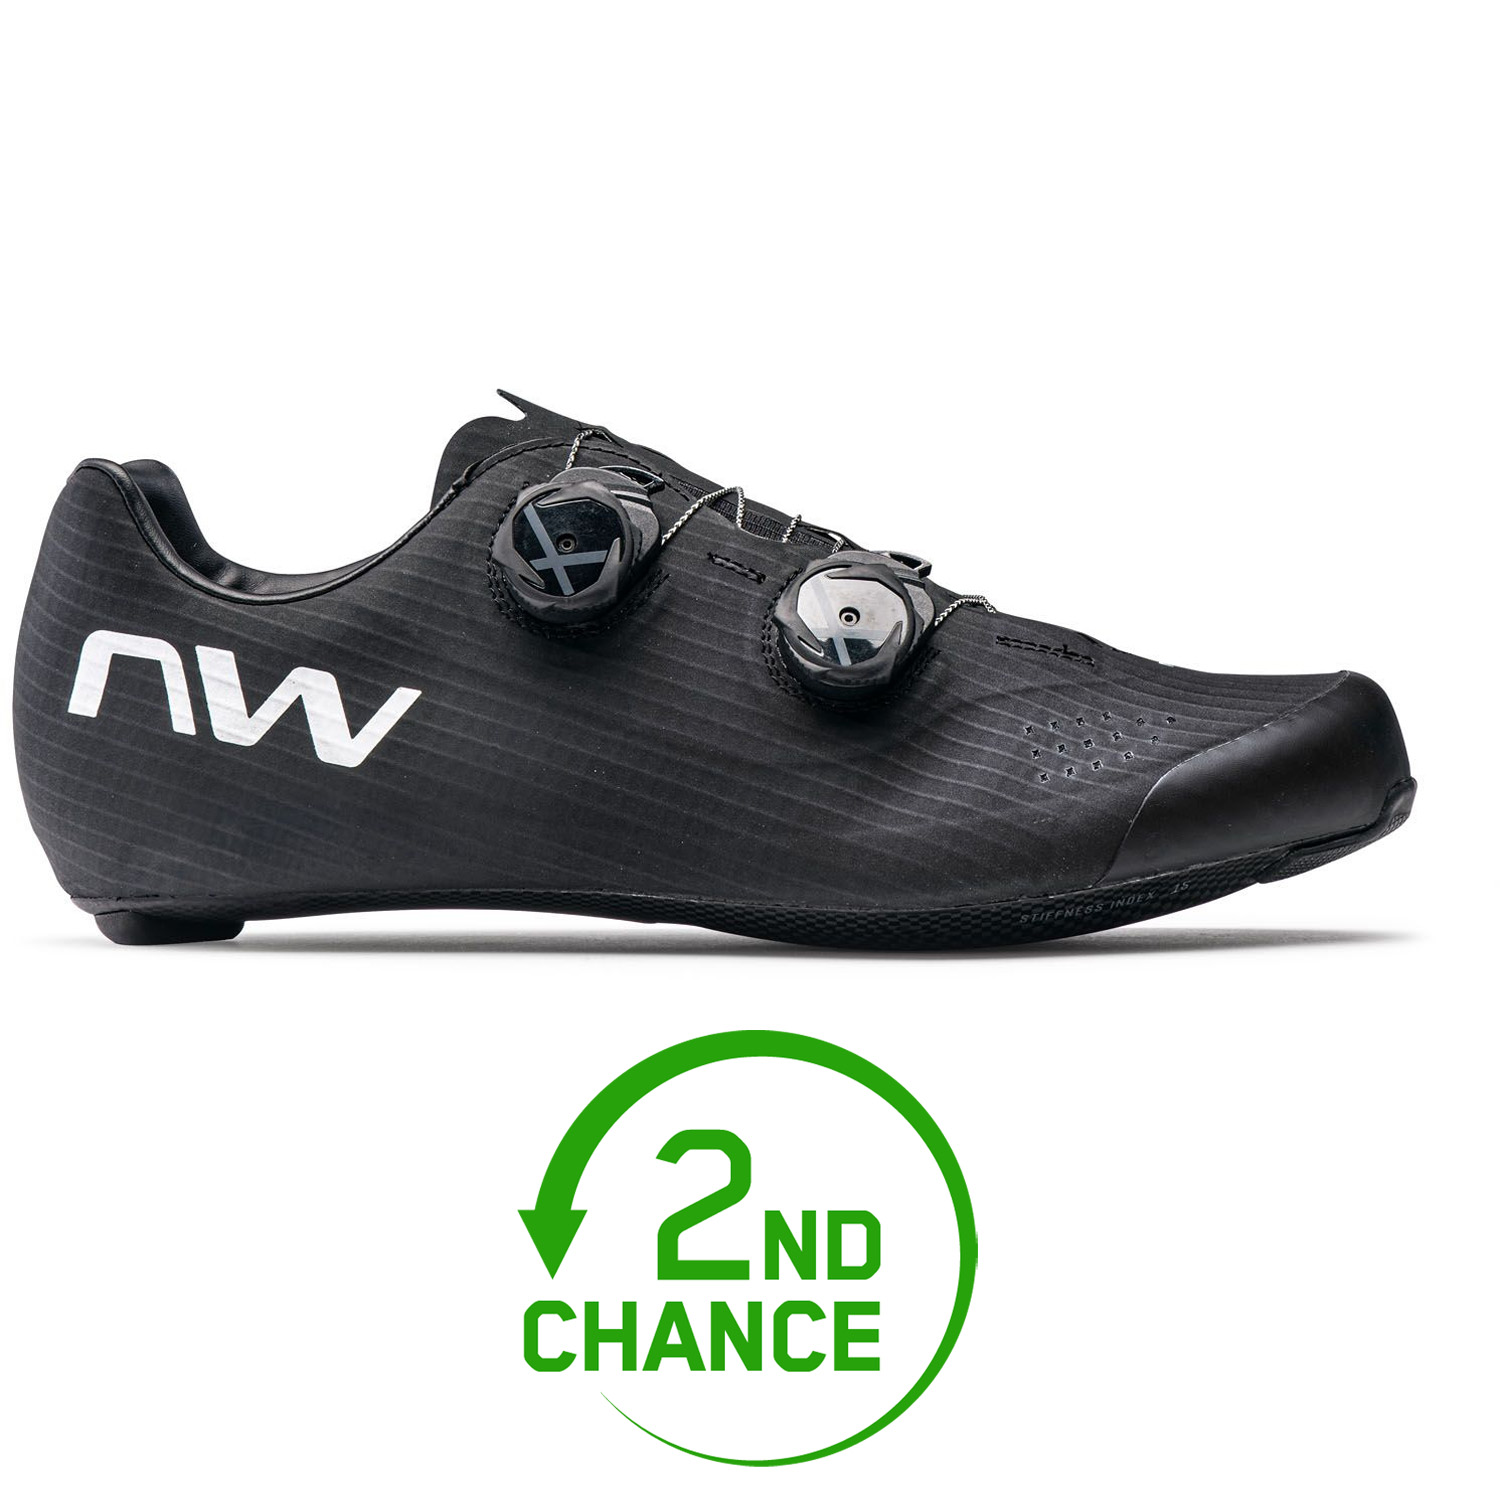 Picture of Northwave Extreme Pro 3 Road Shoes Men - black/white 11 - 2nd Choice